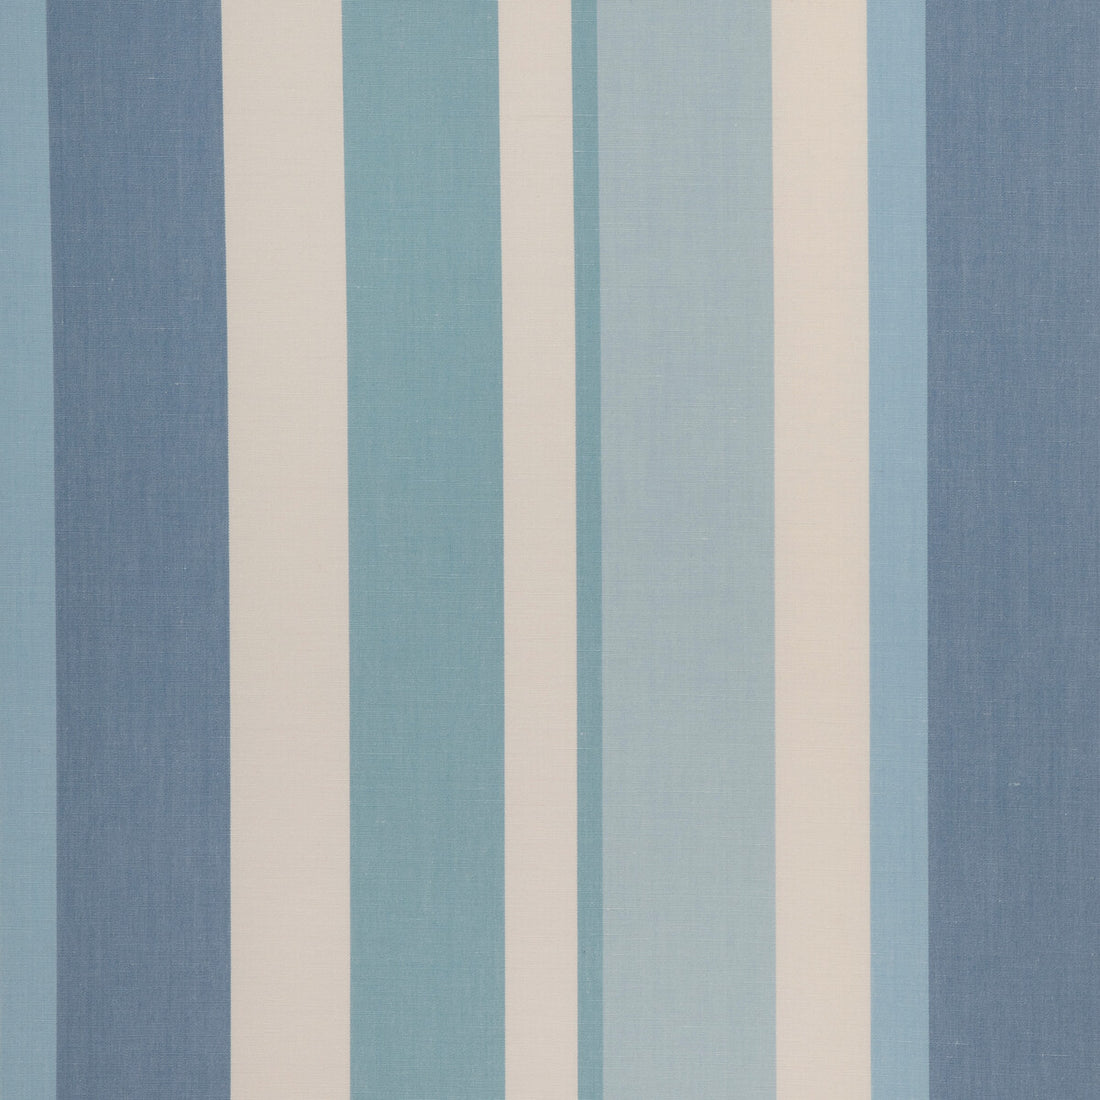 Fisher Stripe fabric in capri/sky color - pattern 2023108.55.0 - by Lee Jofa in the Highfield Stripes And Plaids collection